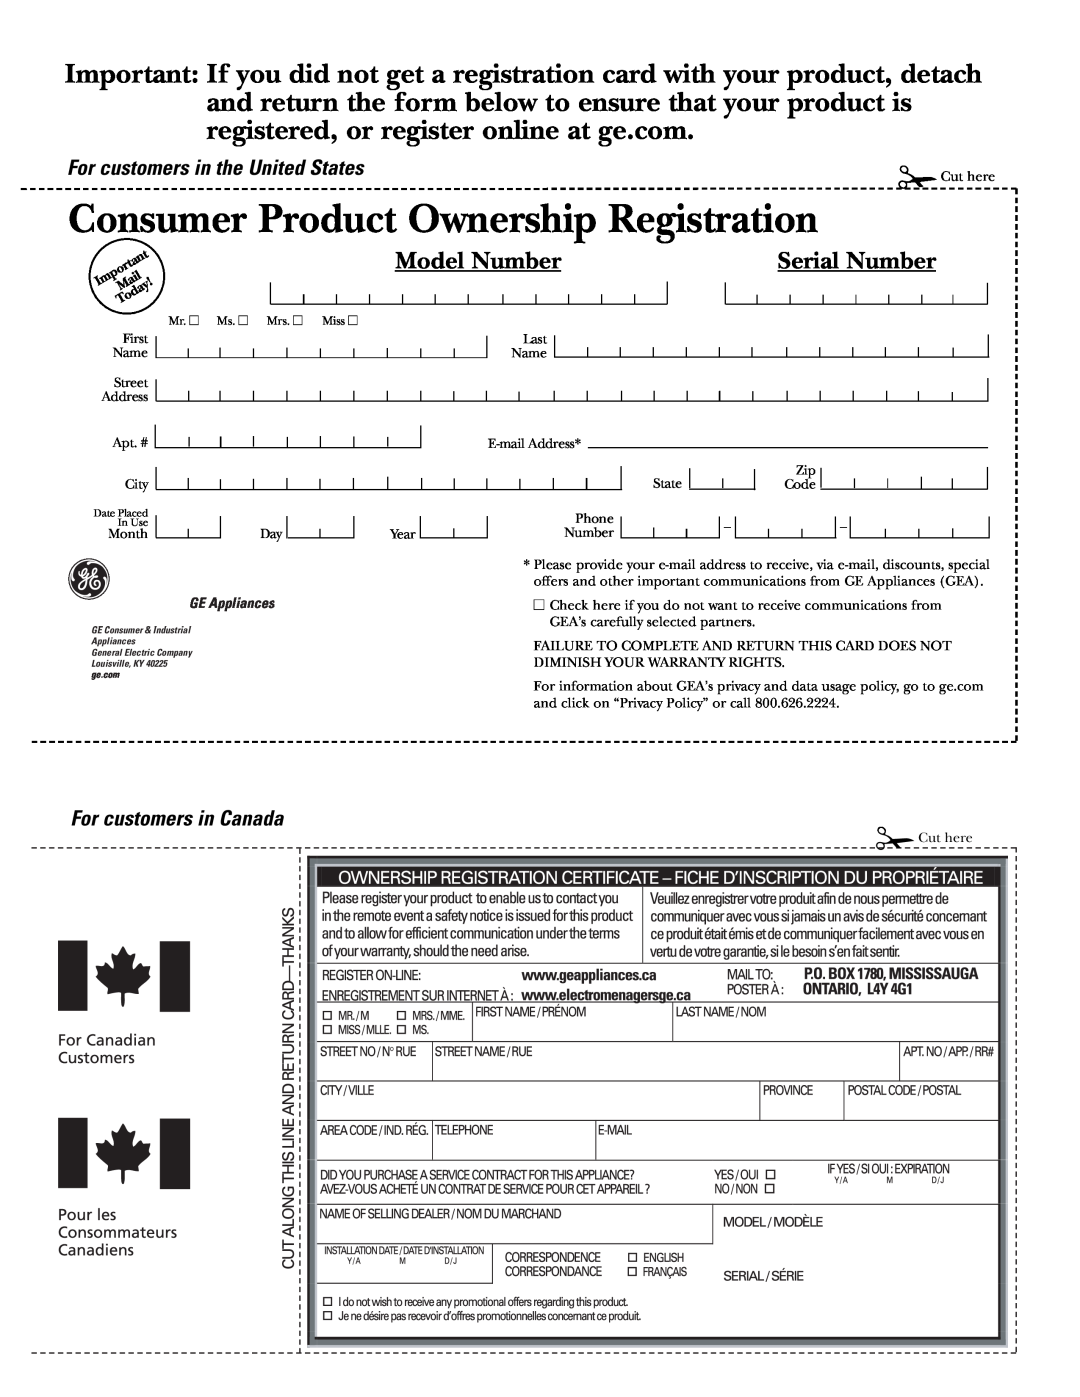 GE 20 For customers in the United States, For customers in Canada, Consumer Product Ownership Registration, Model Number 